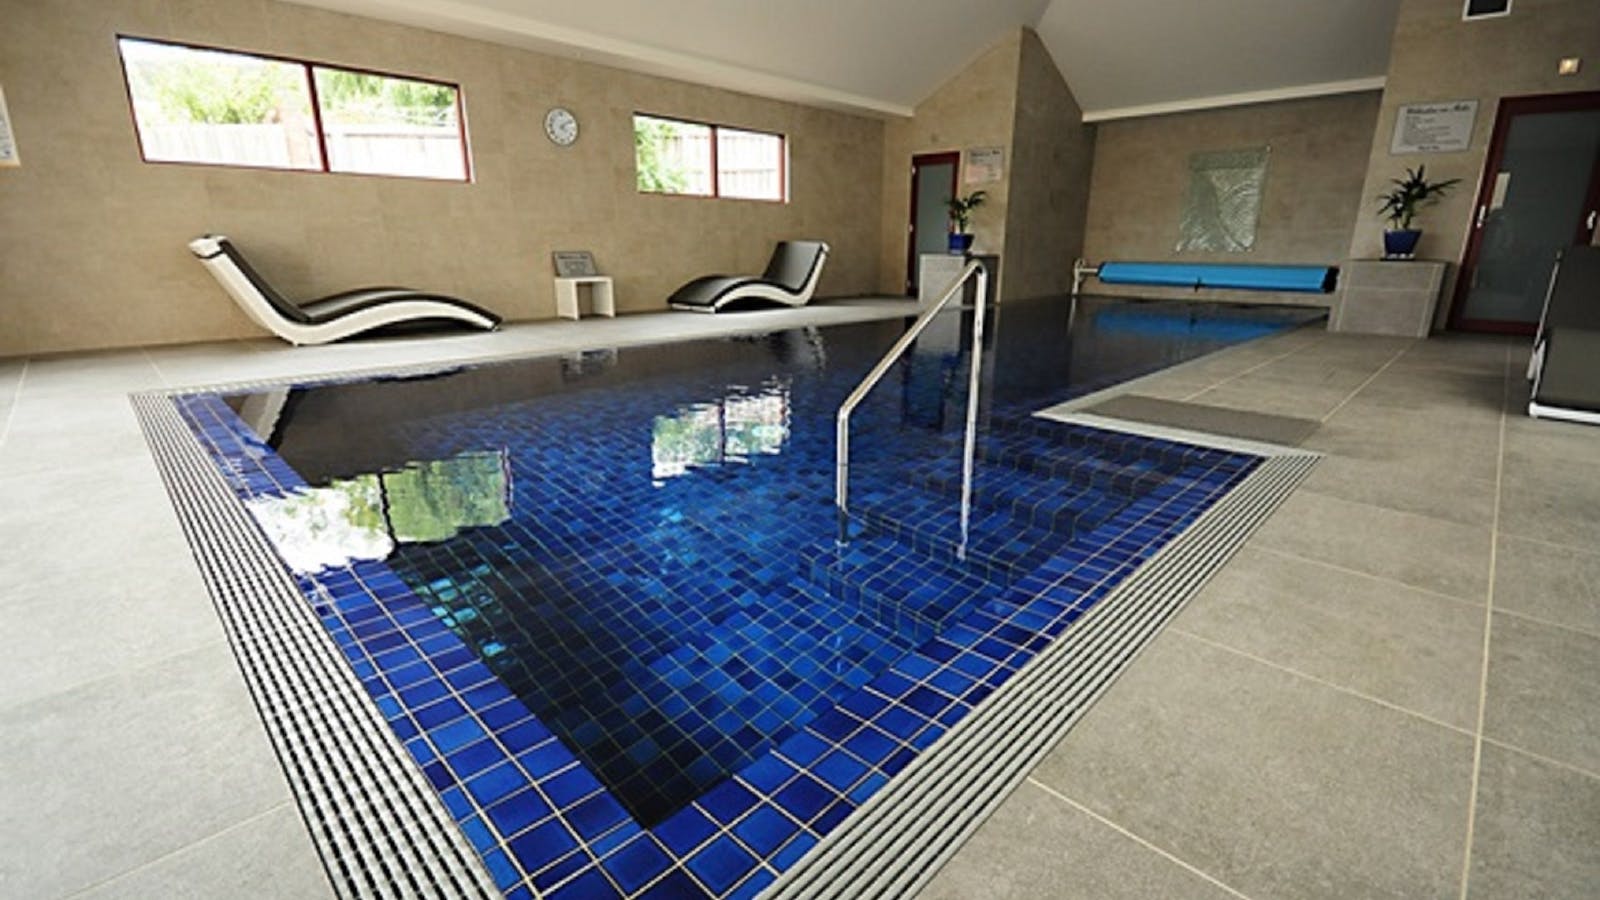 Willesden on Stoke Private Indoor Heated Ozone Pool